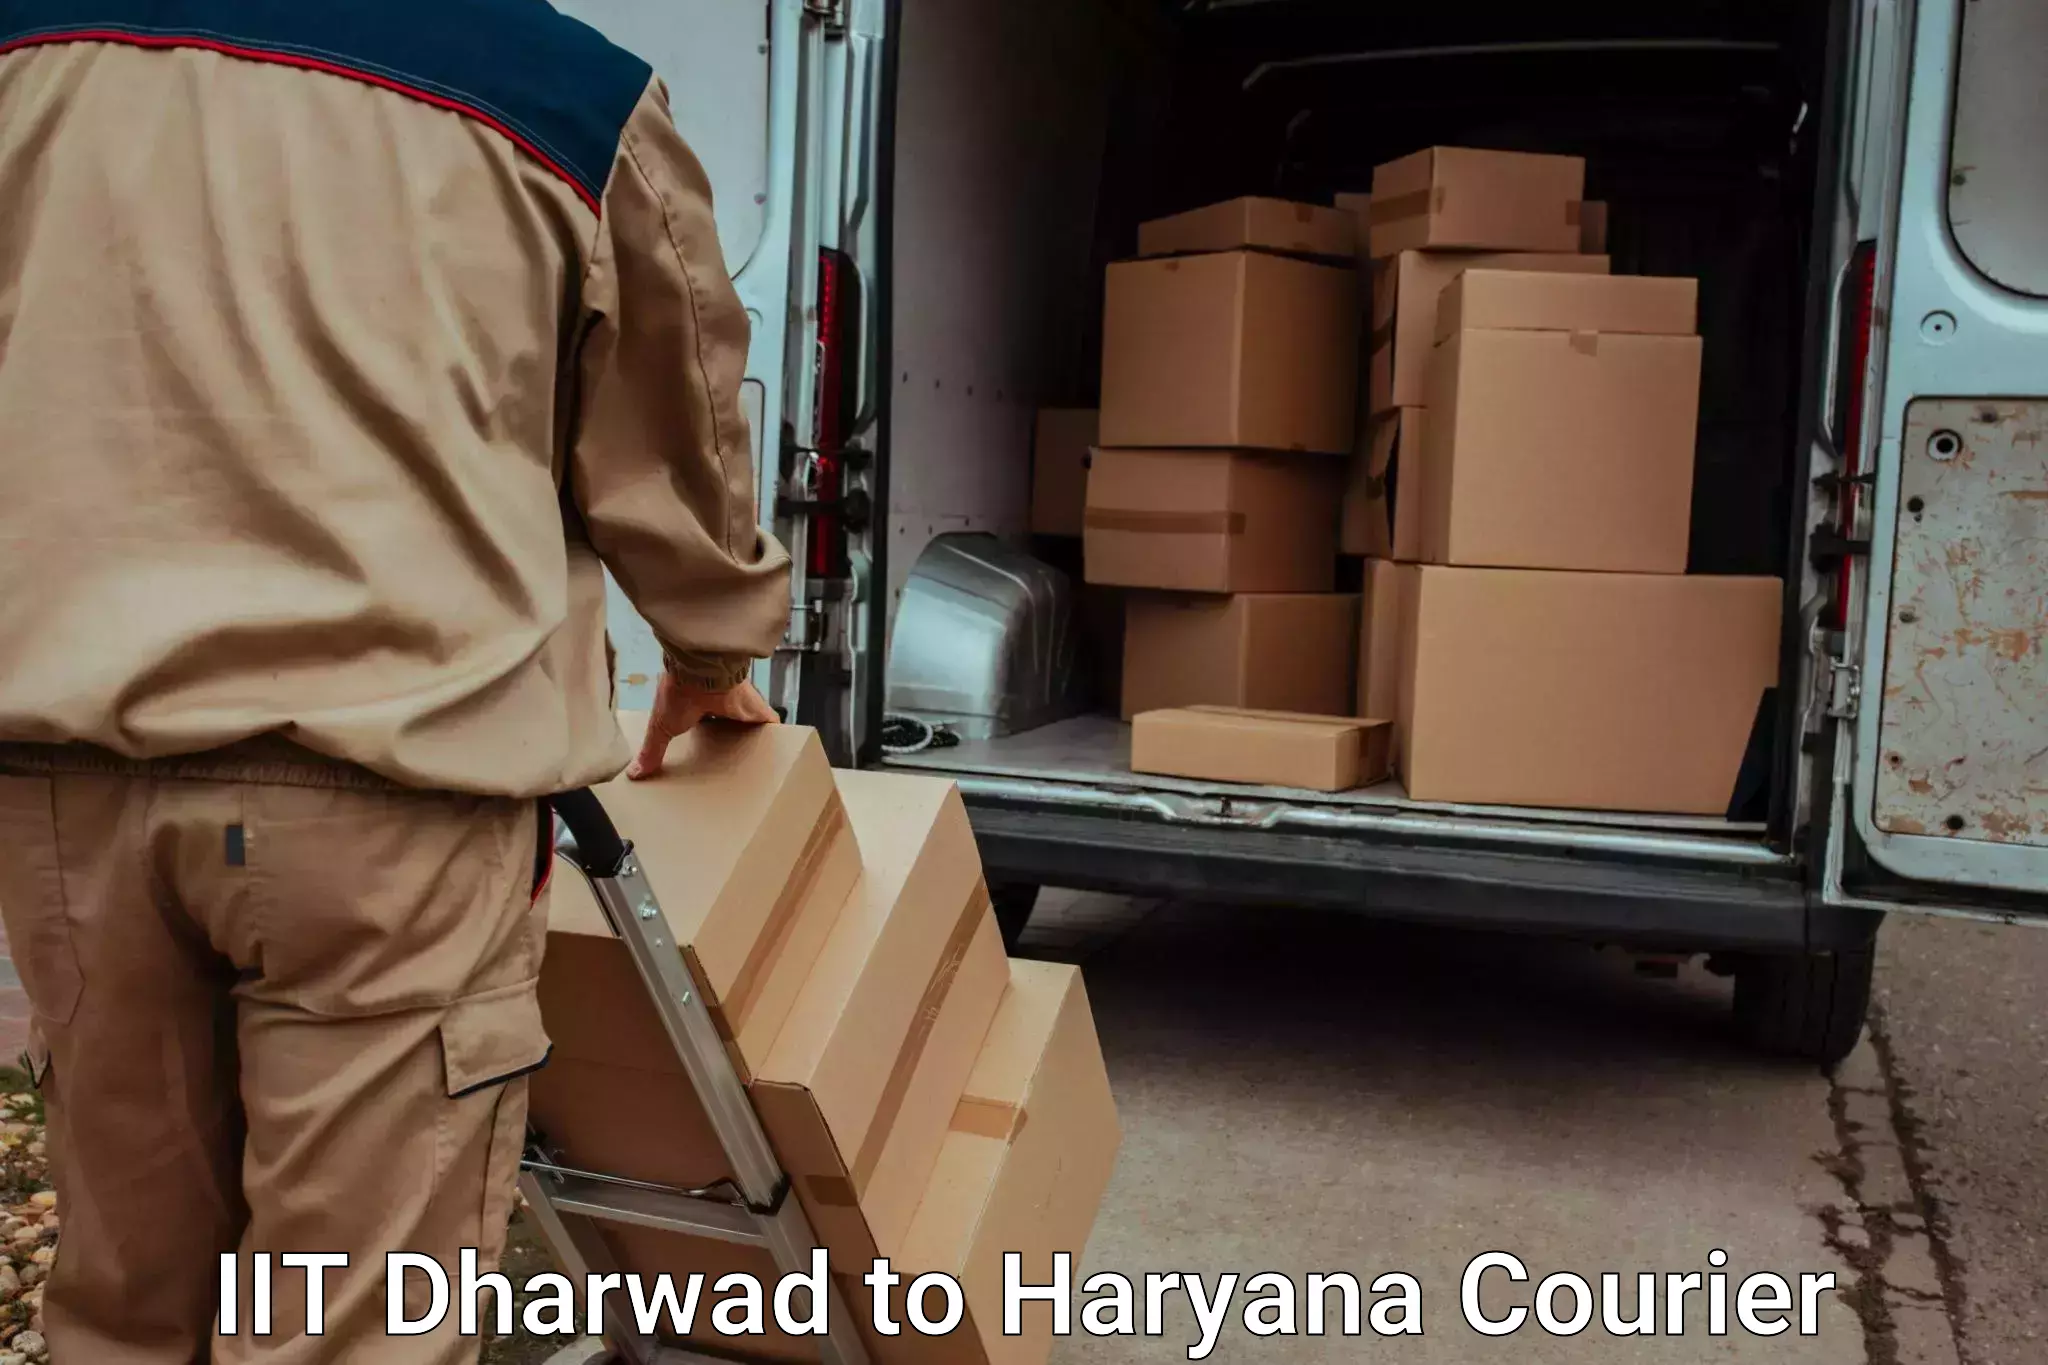 Household goods transport service IIT Dharwad to Sohna